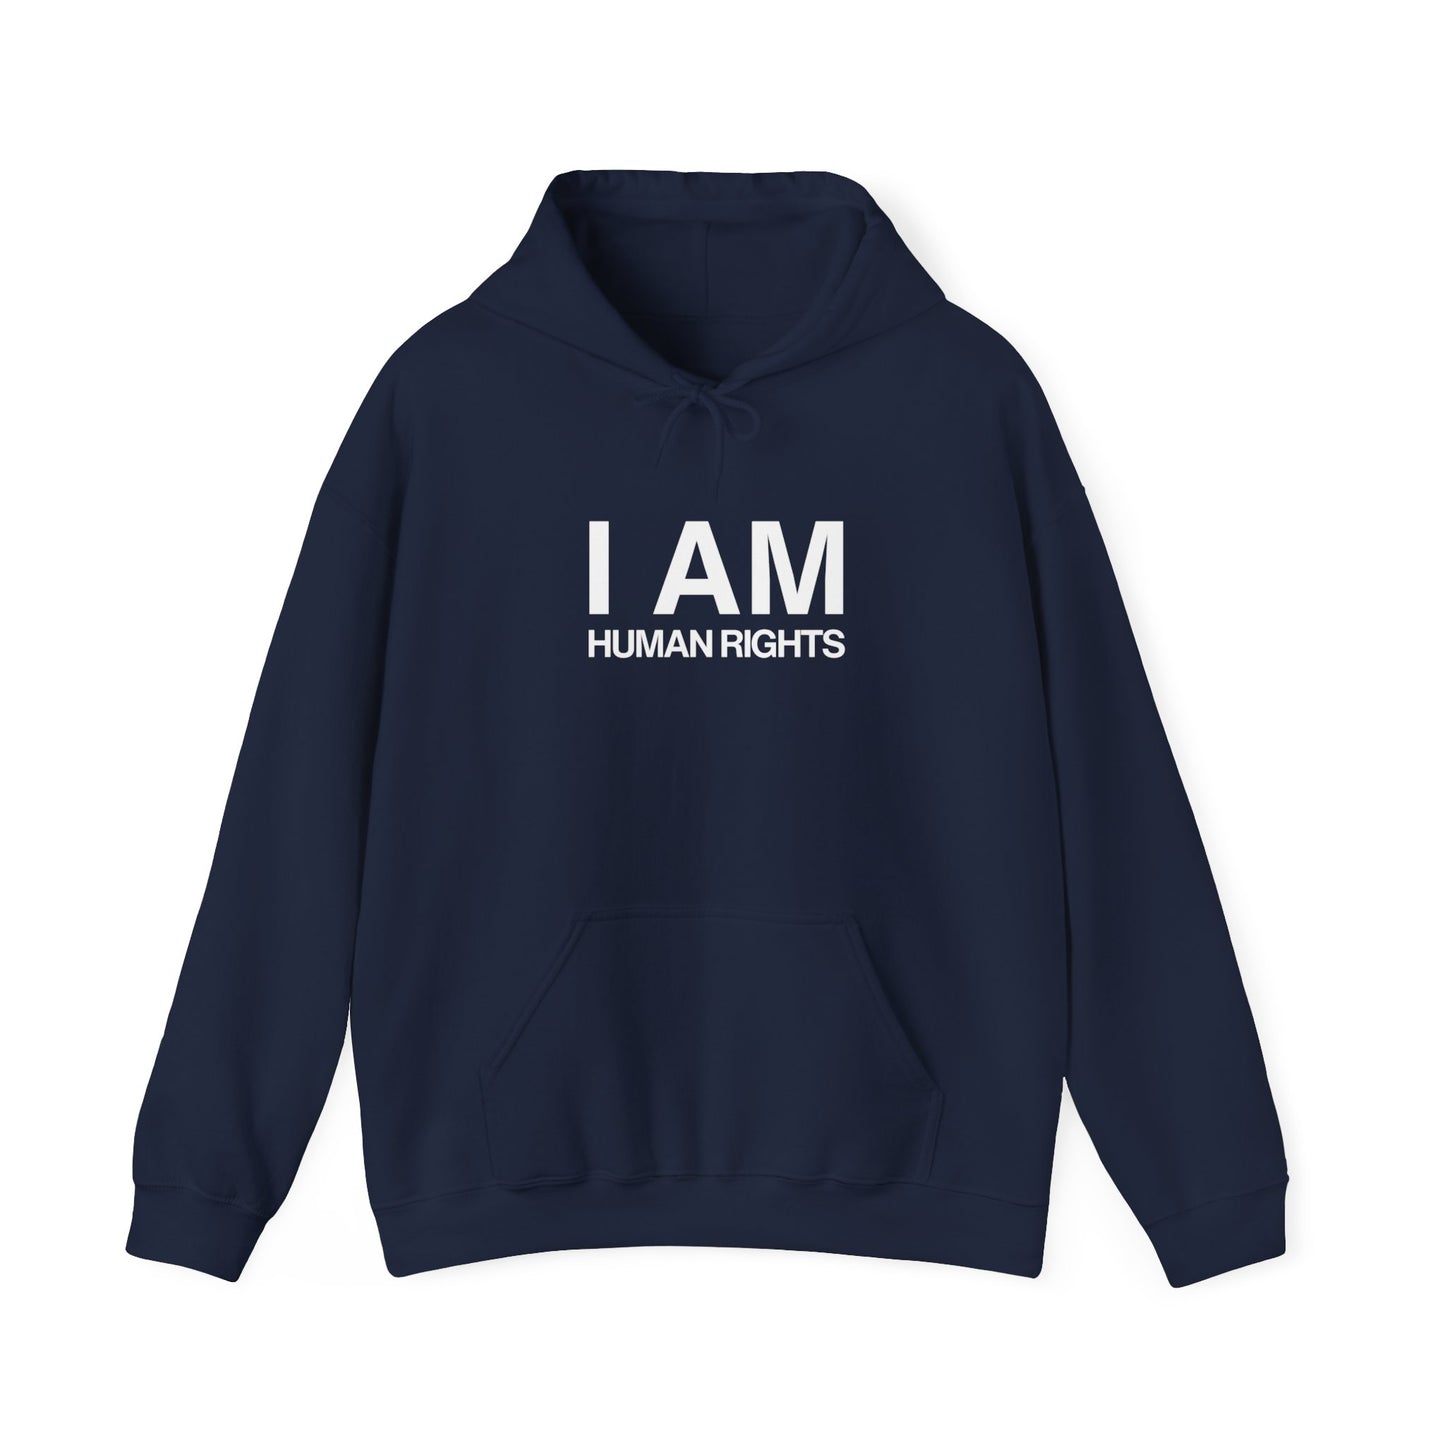 'I am Human Rights' Hoodie Sweatshirt - Human Rights Fighter Collection